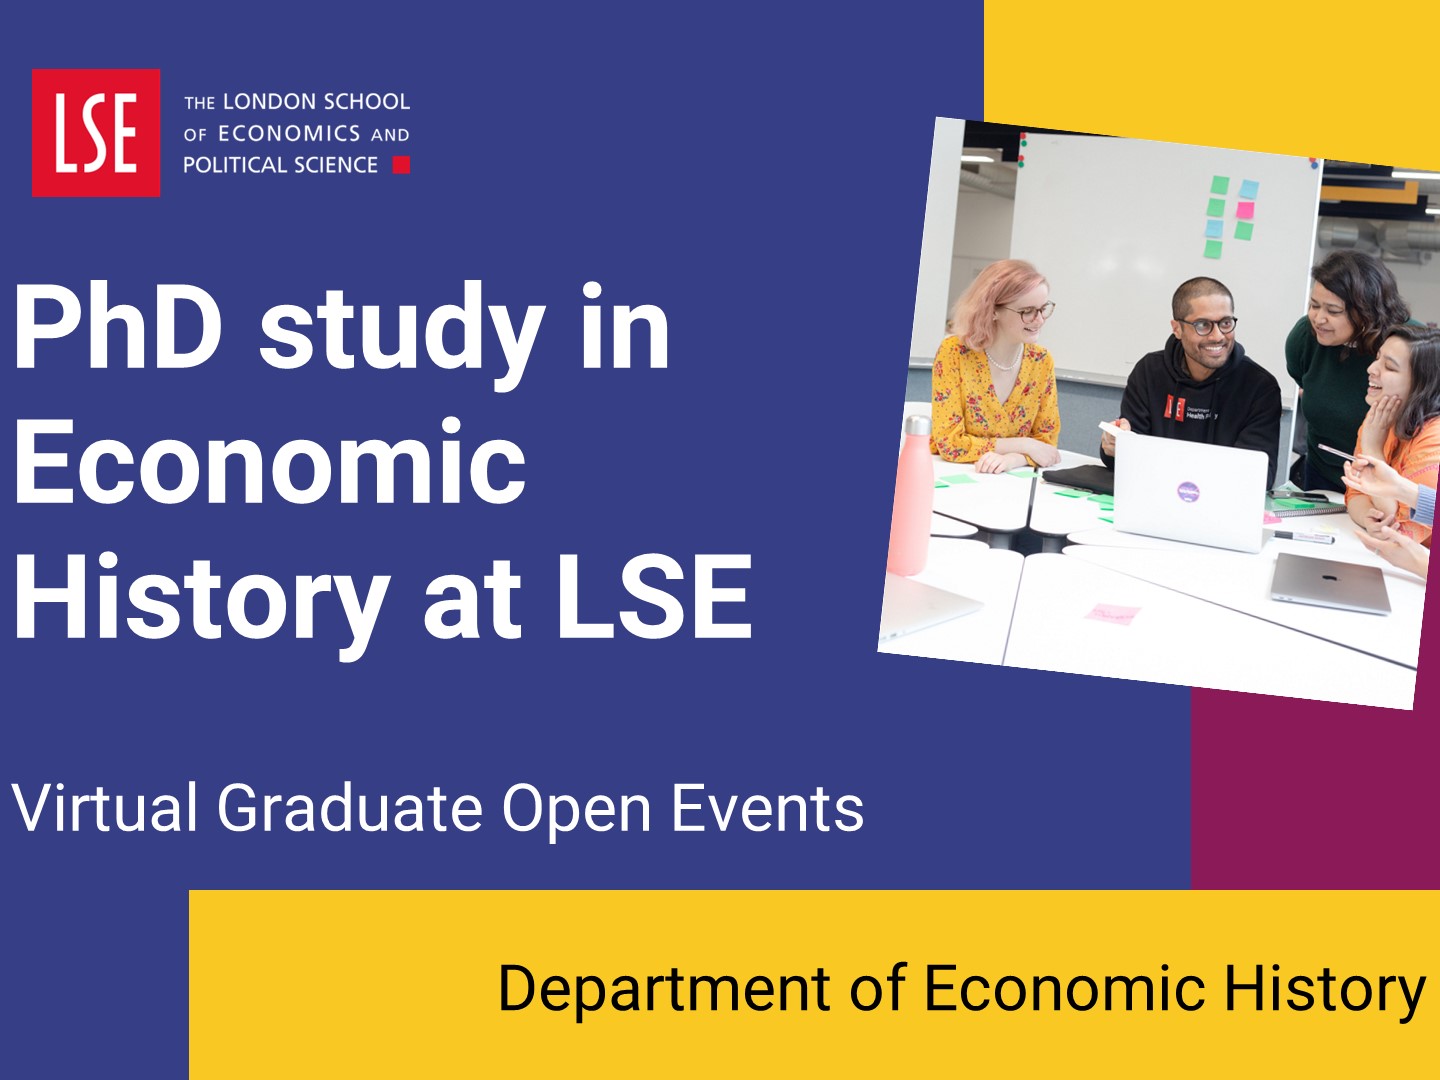 Introduction to PhD study in Economic History at LSE